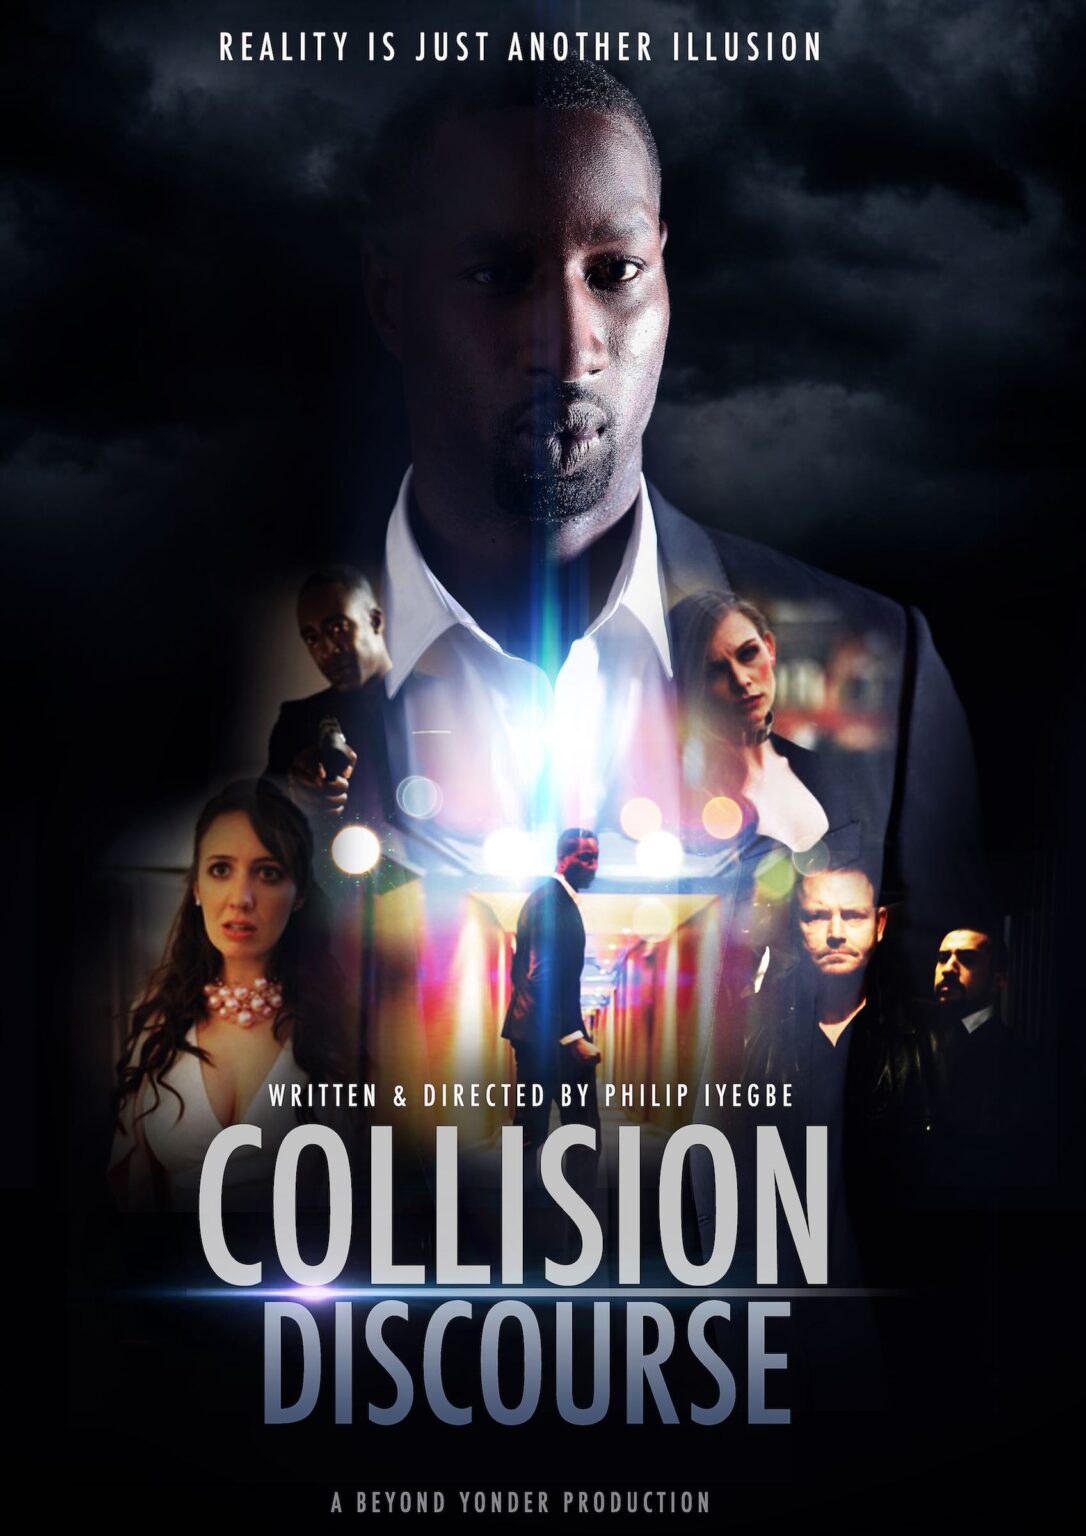 Quarantine has given Philip Iyegbe plenty of time to look to the future, like his newest film, 'Collision Discourse'. Here's our interview with Iyegbe.